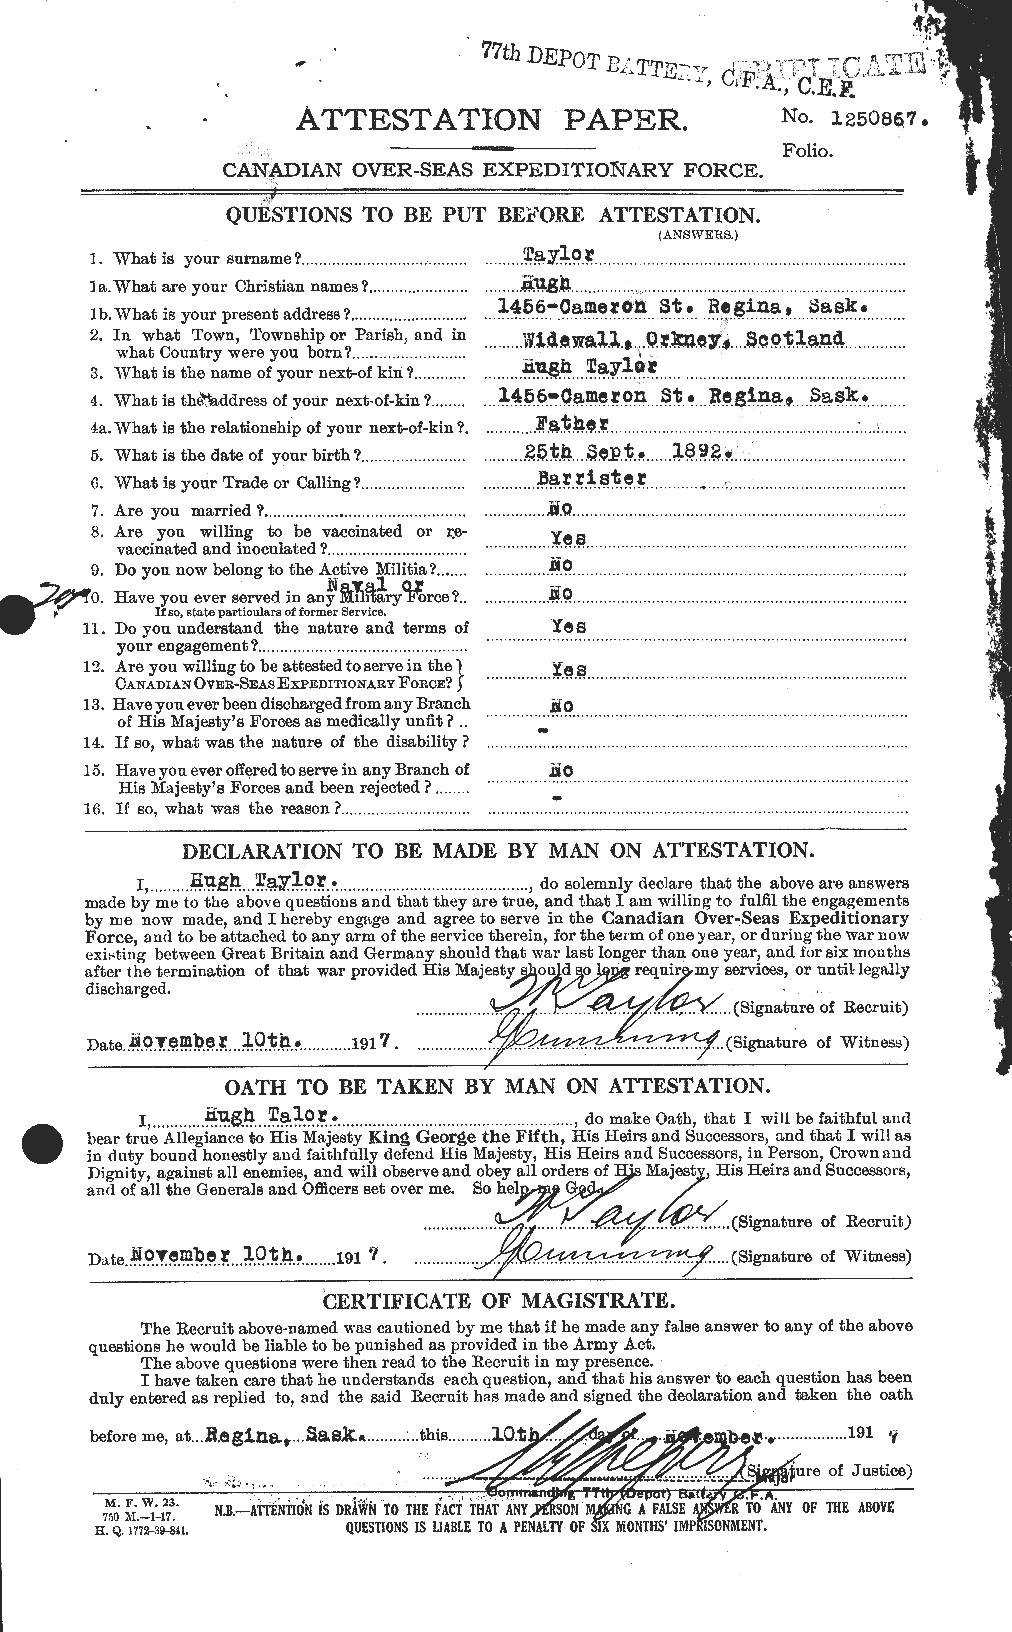 Personnel Records of the First World War - CEF 626613a